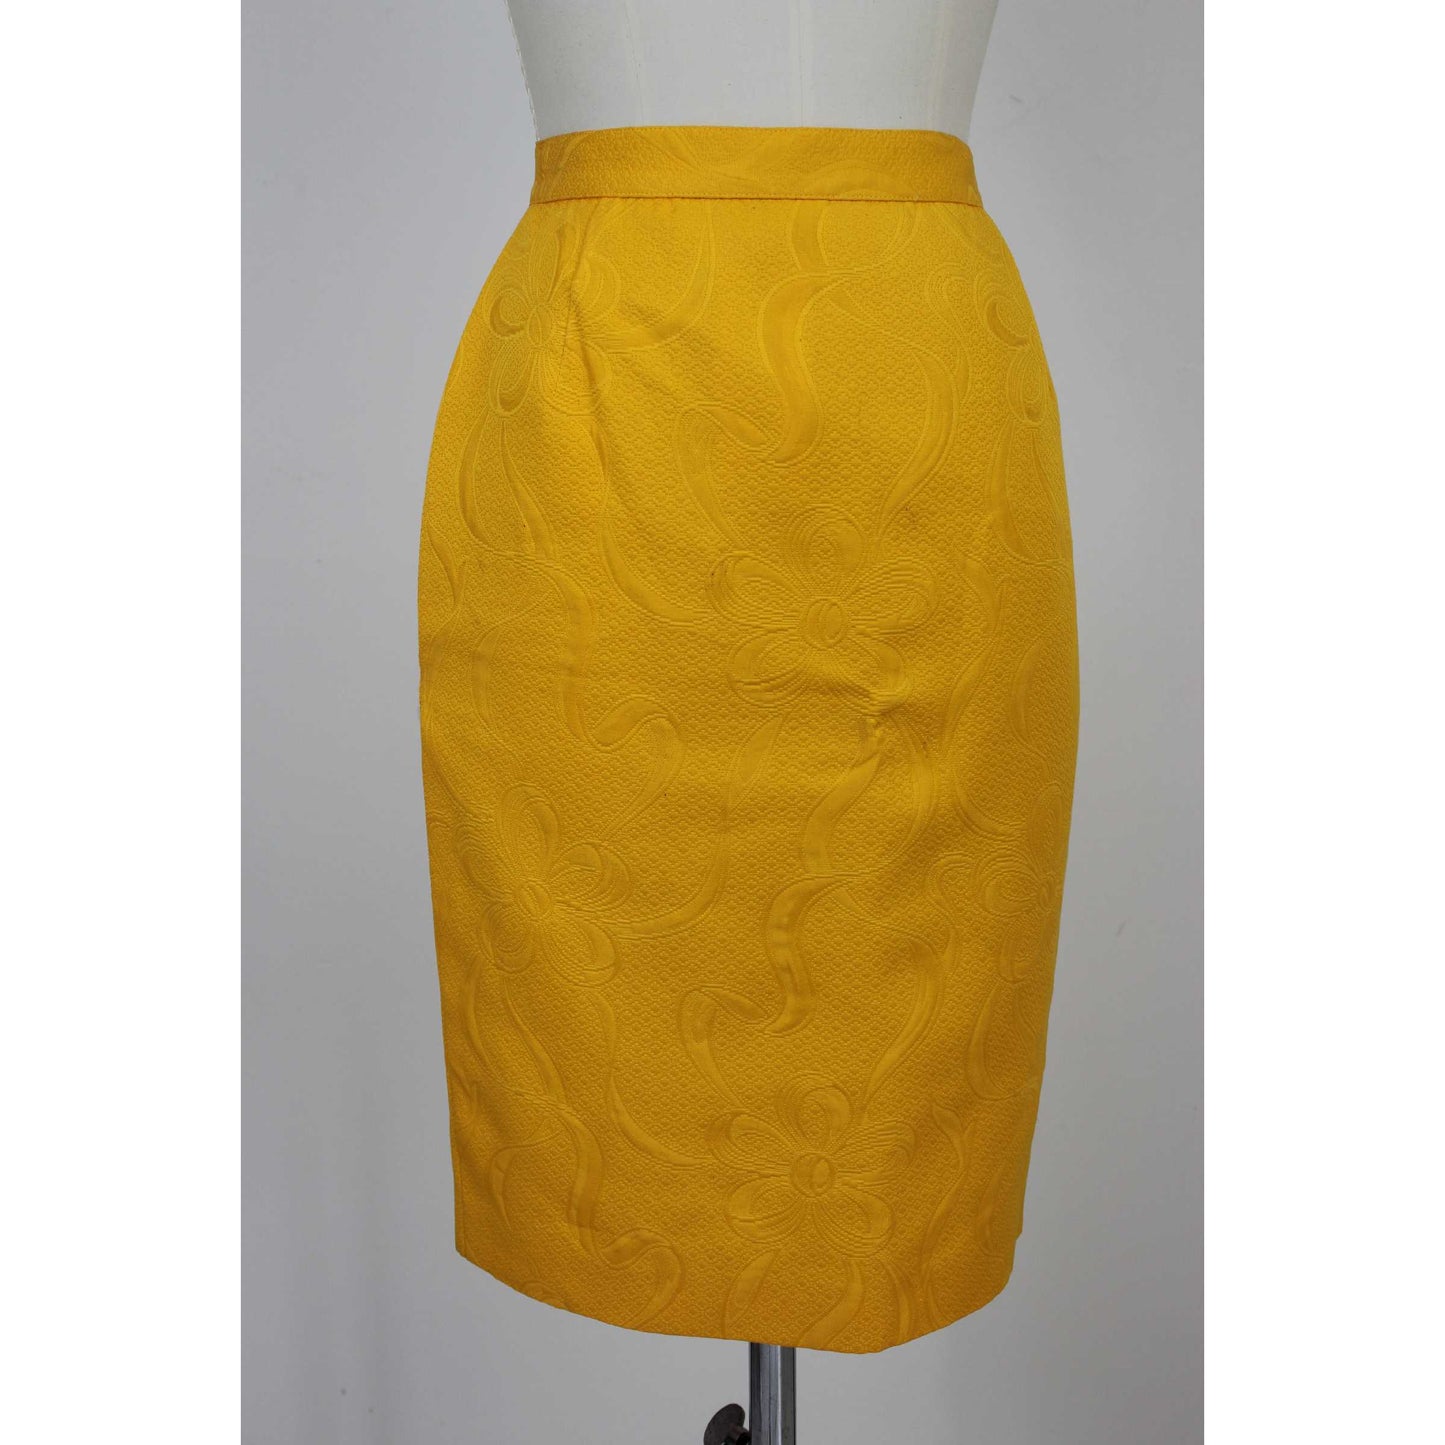 Dany Floral Damask Cotton Yellow Vintage Skirt Suit 1970s